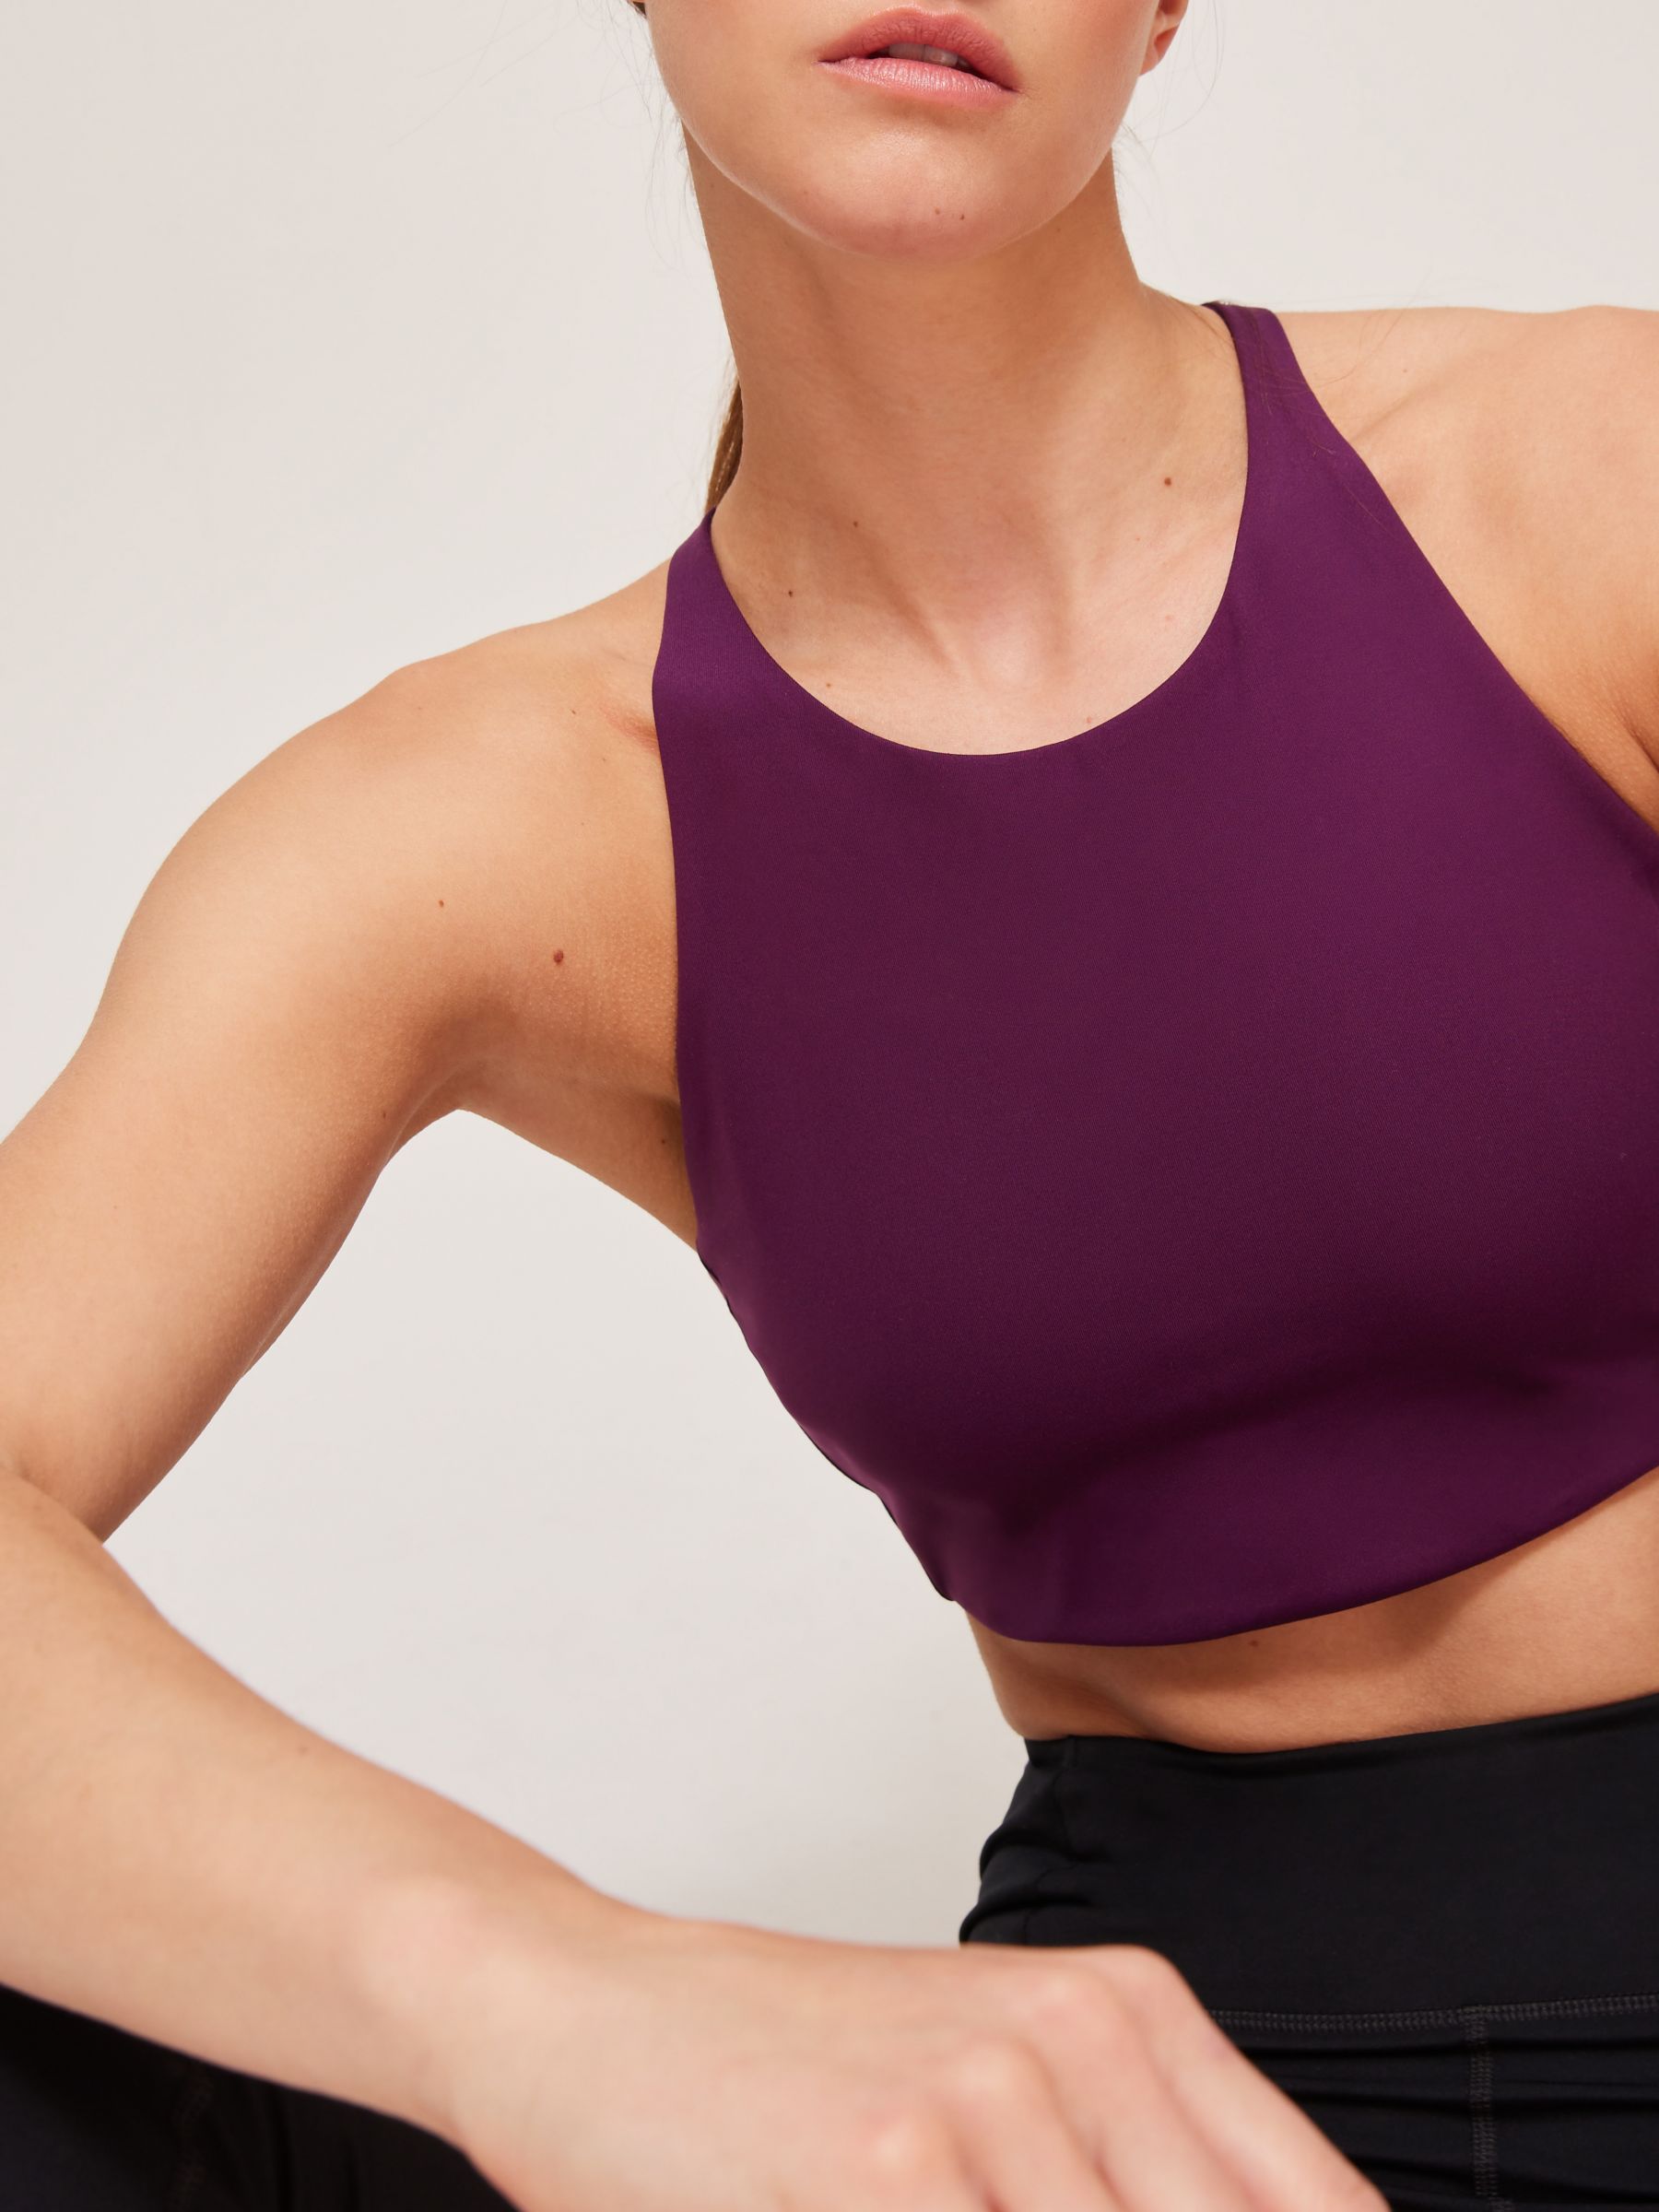 Topanga sports Bra - Made from recycled plastic bottles